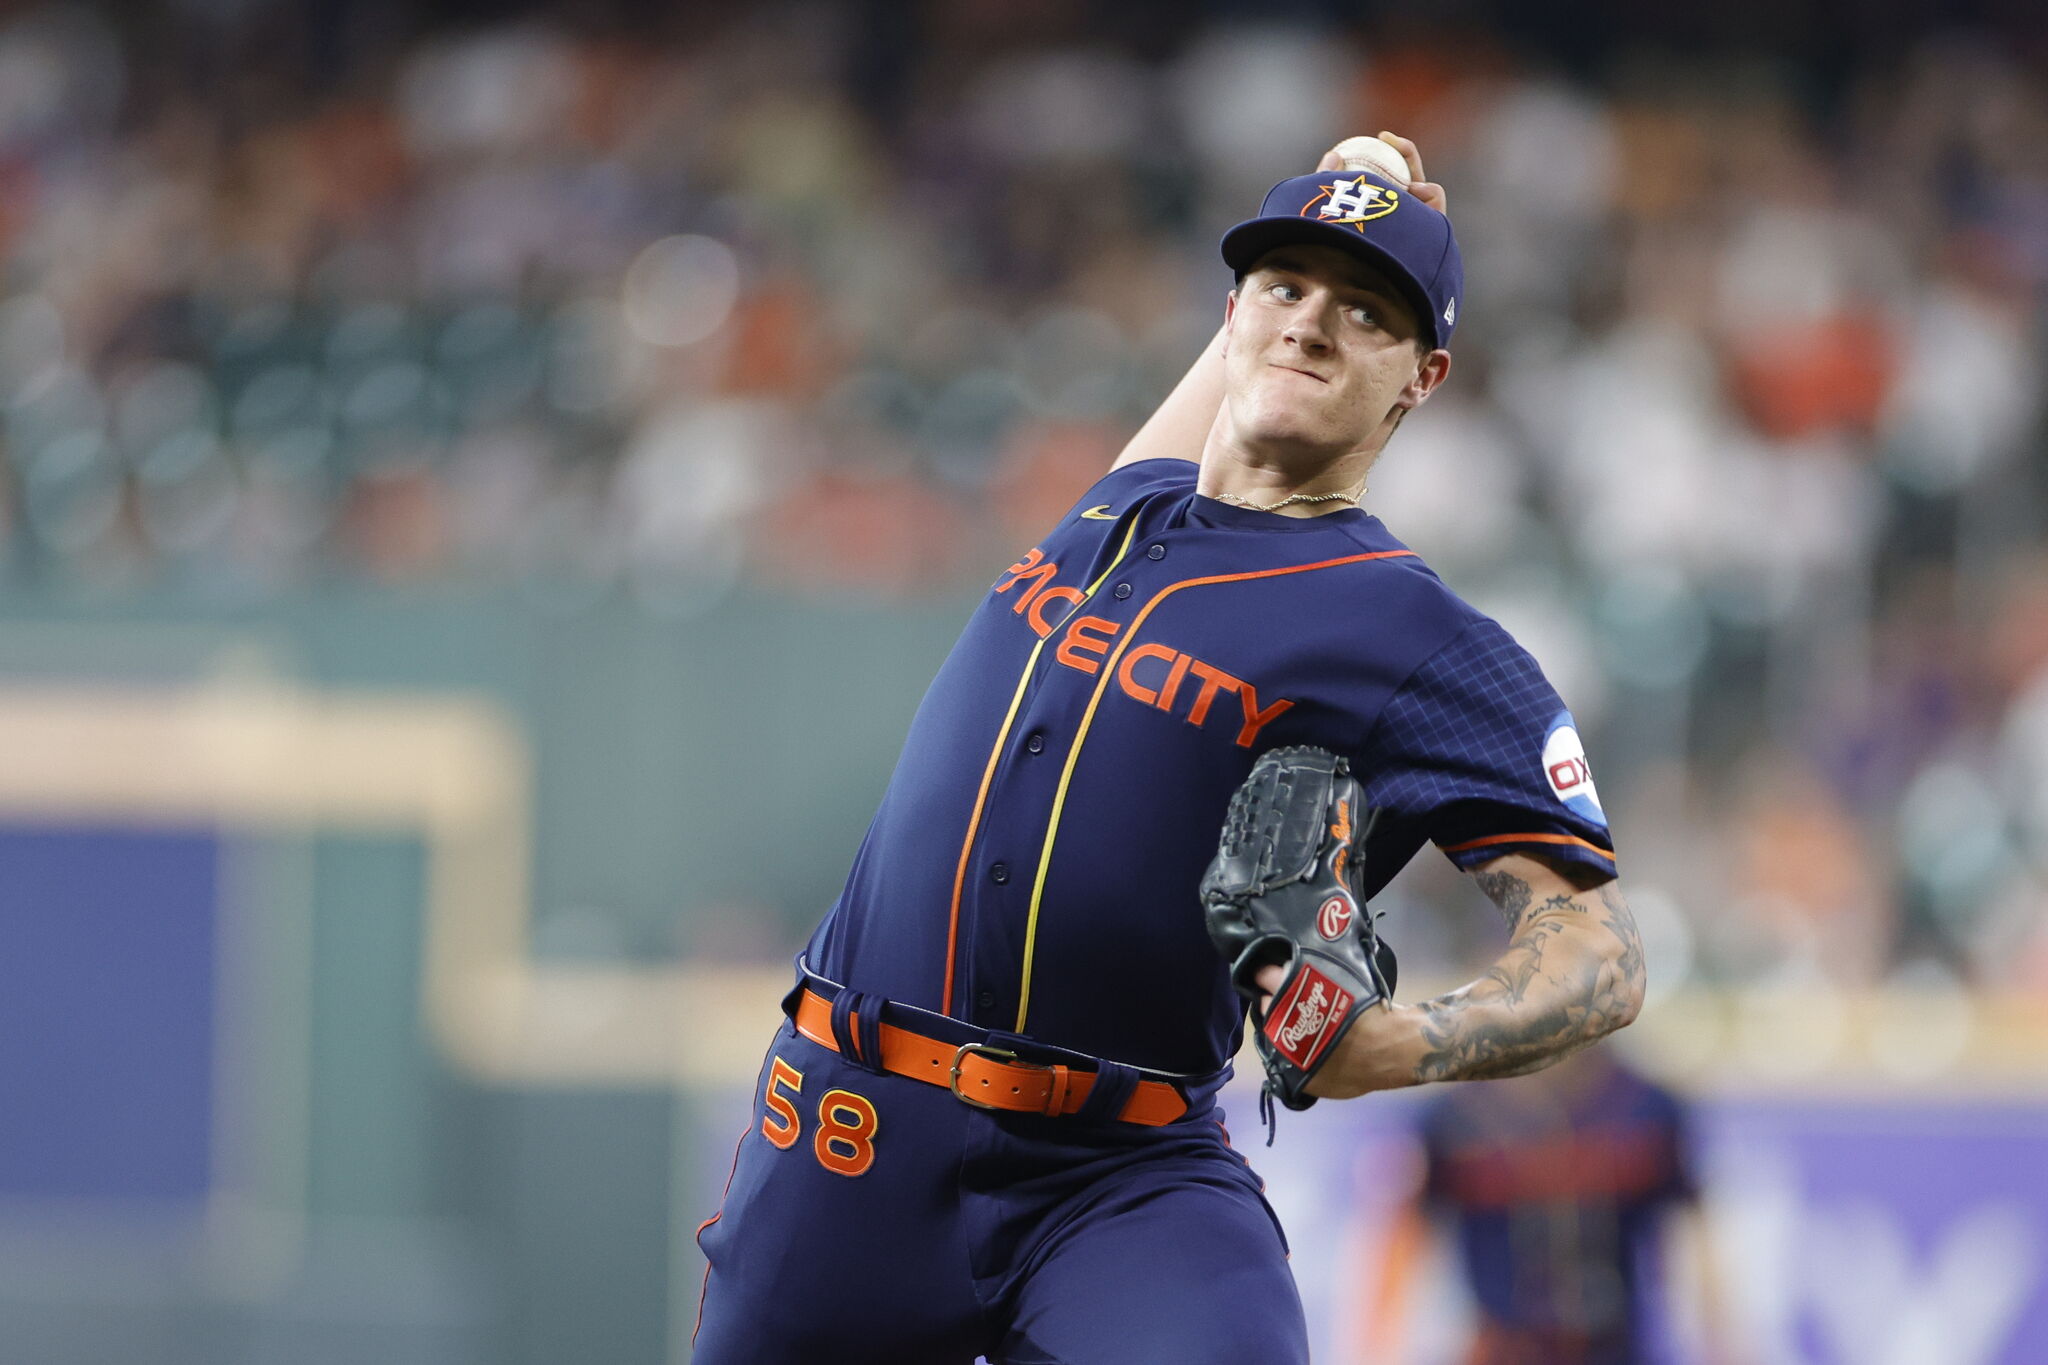 Astros pitcher Hunter Brown looks like the real deal in Major League debut